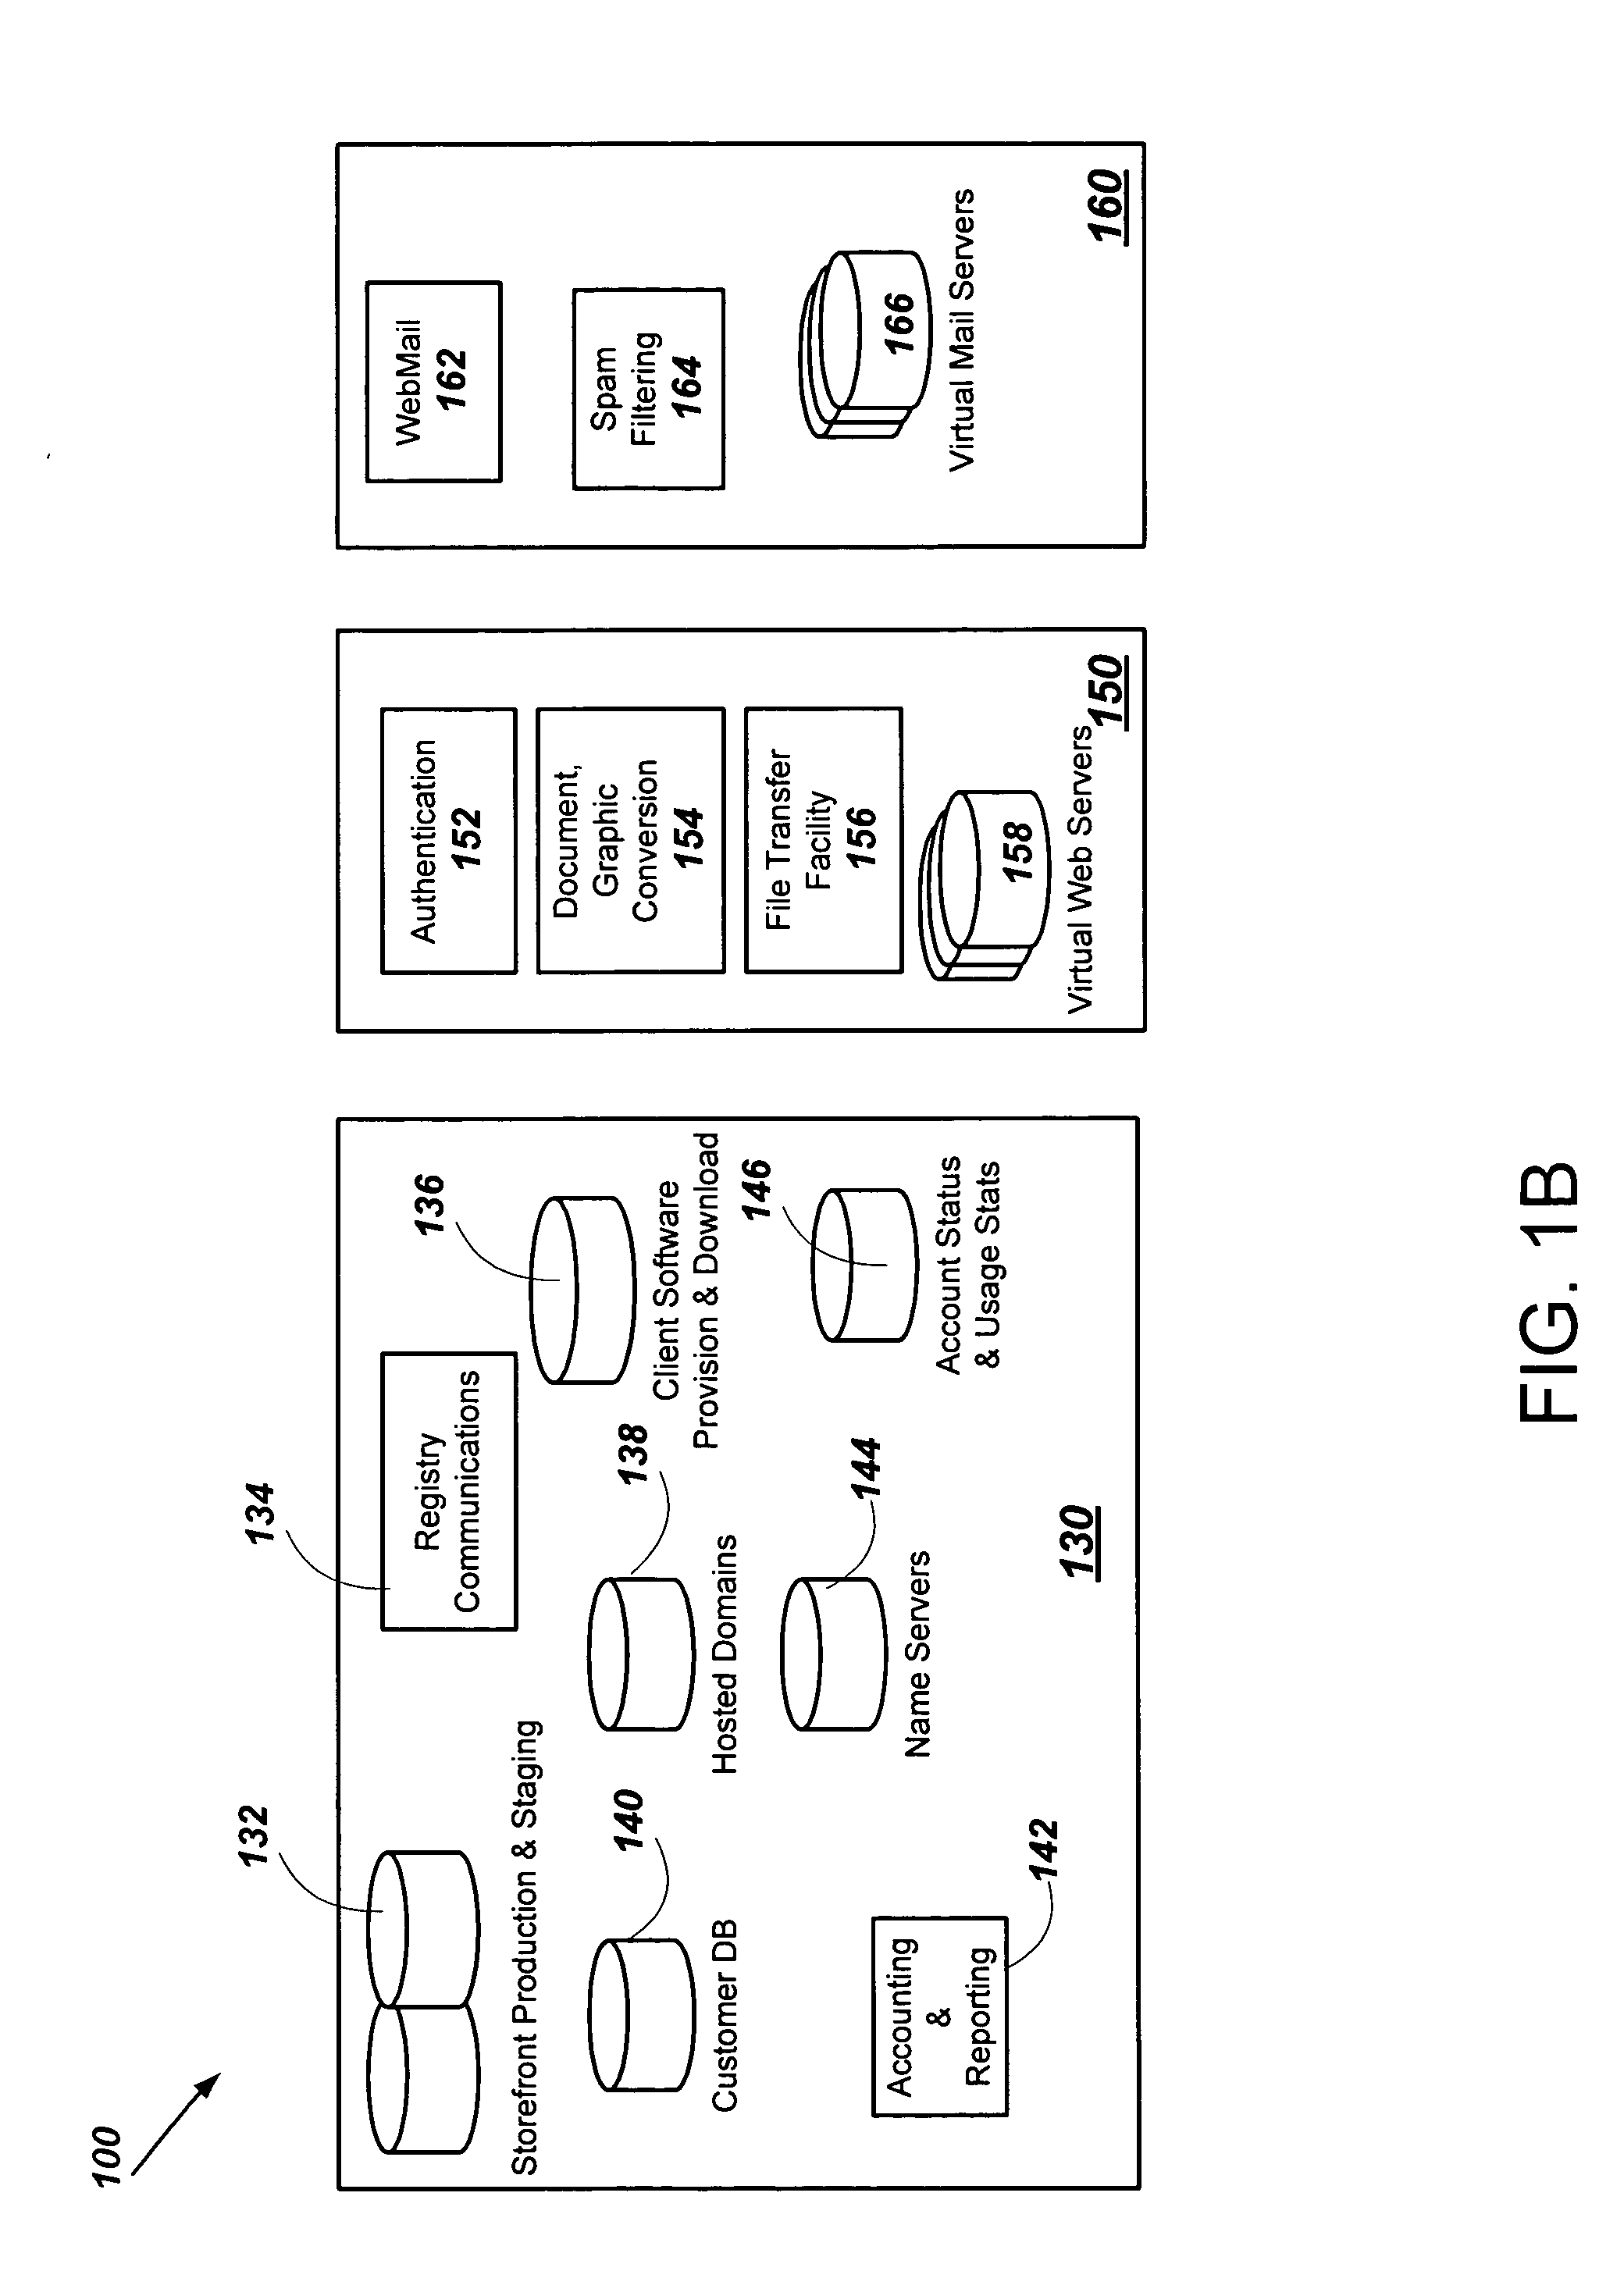 System and method for automatic domain-name registration and web publishing